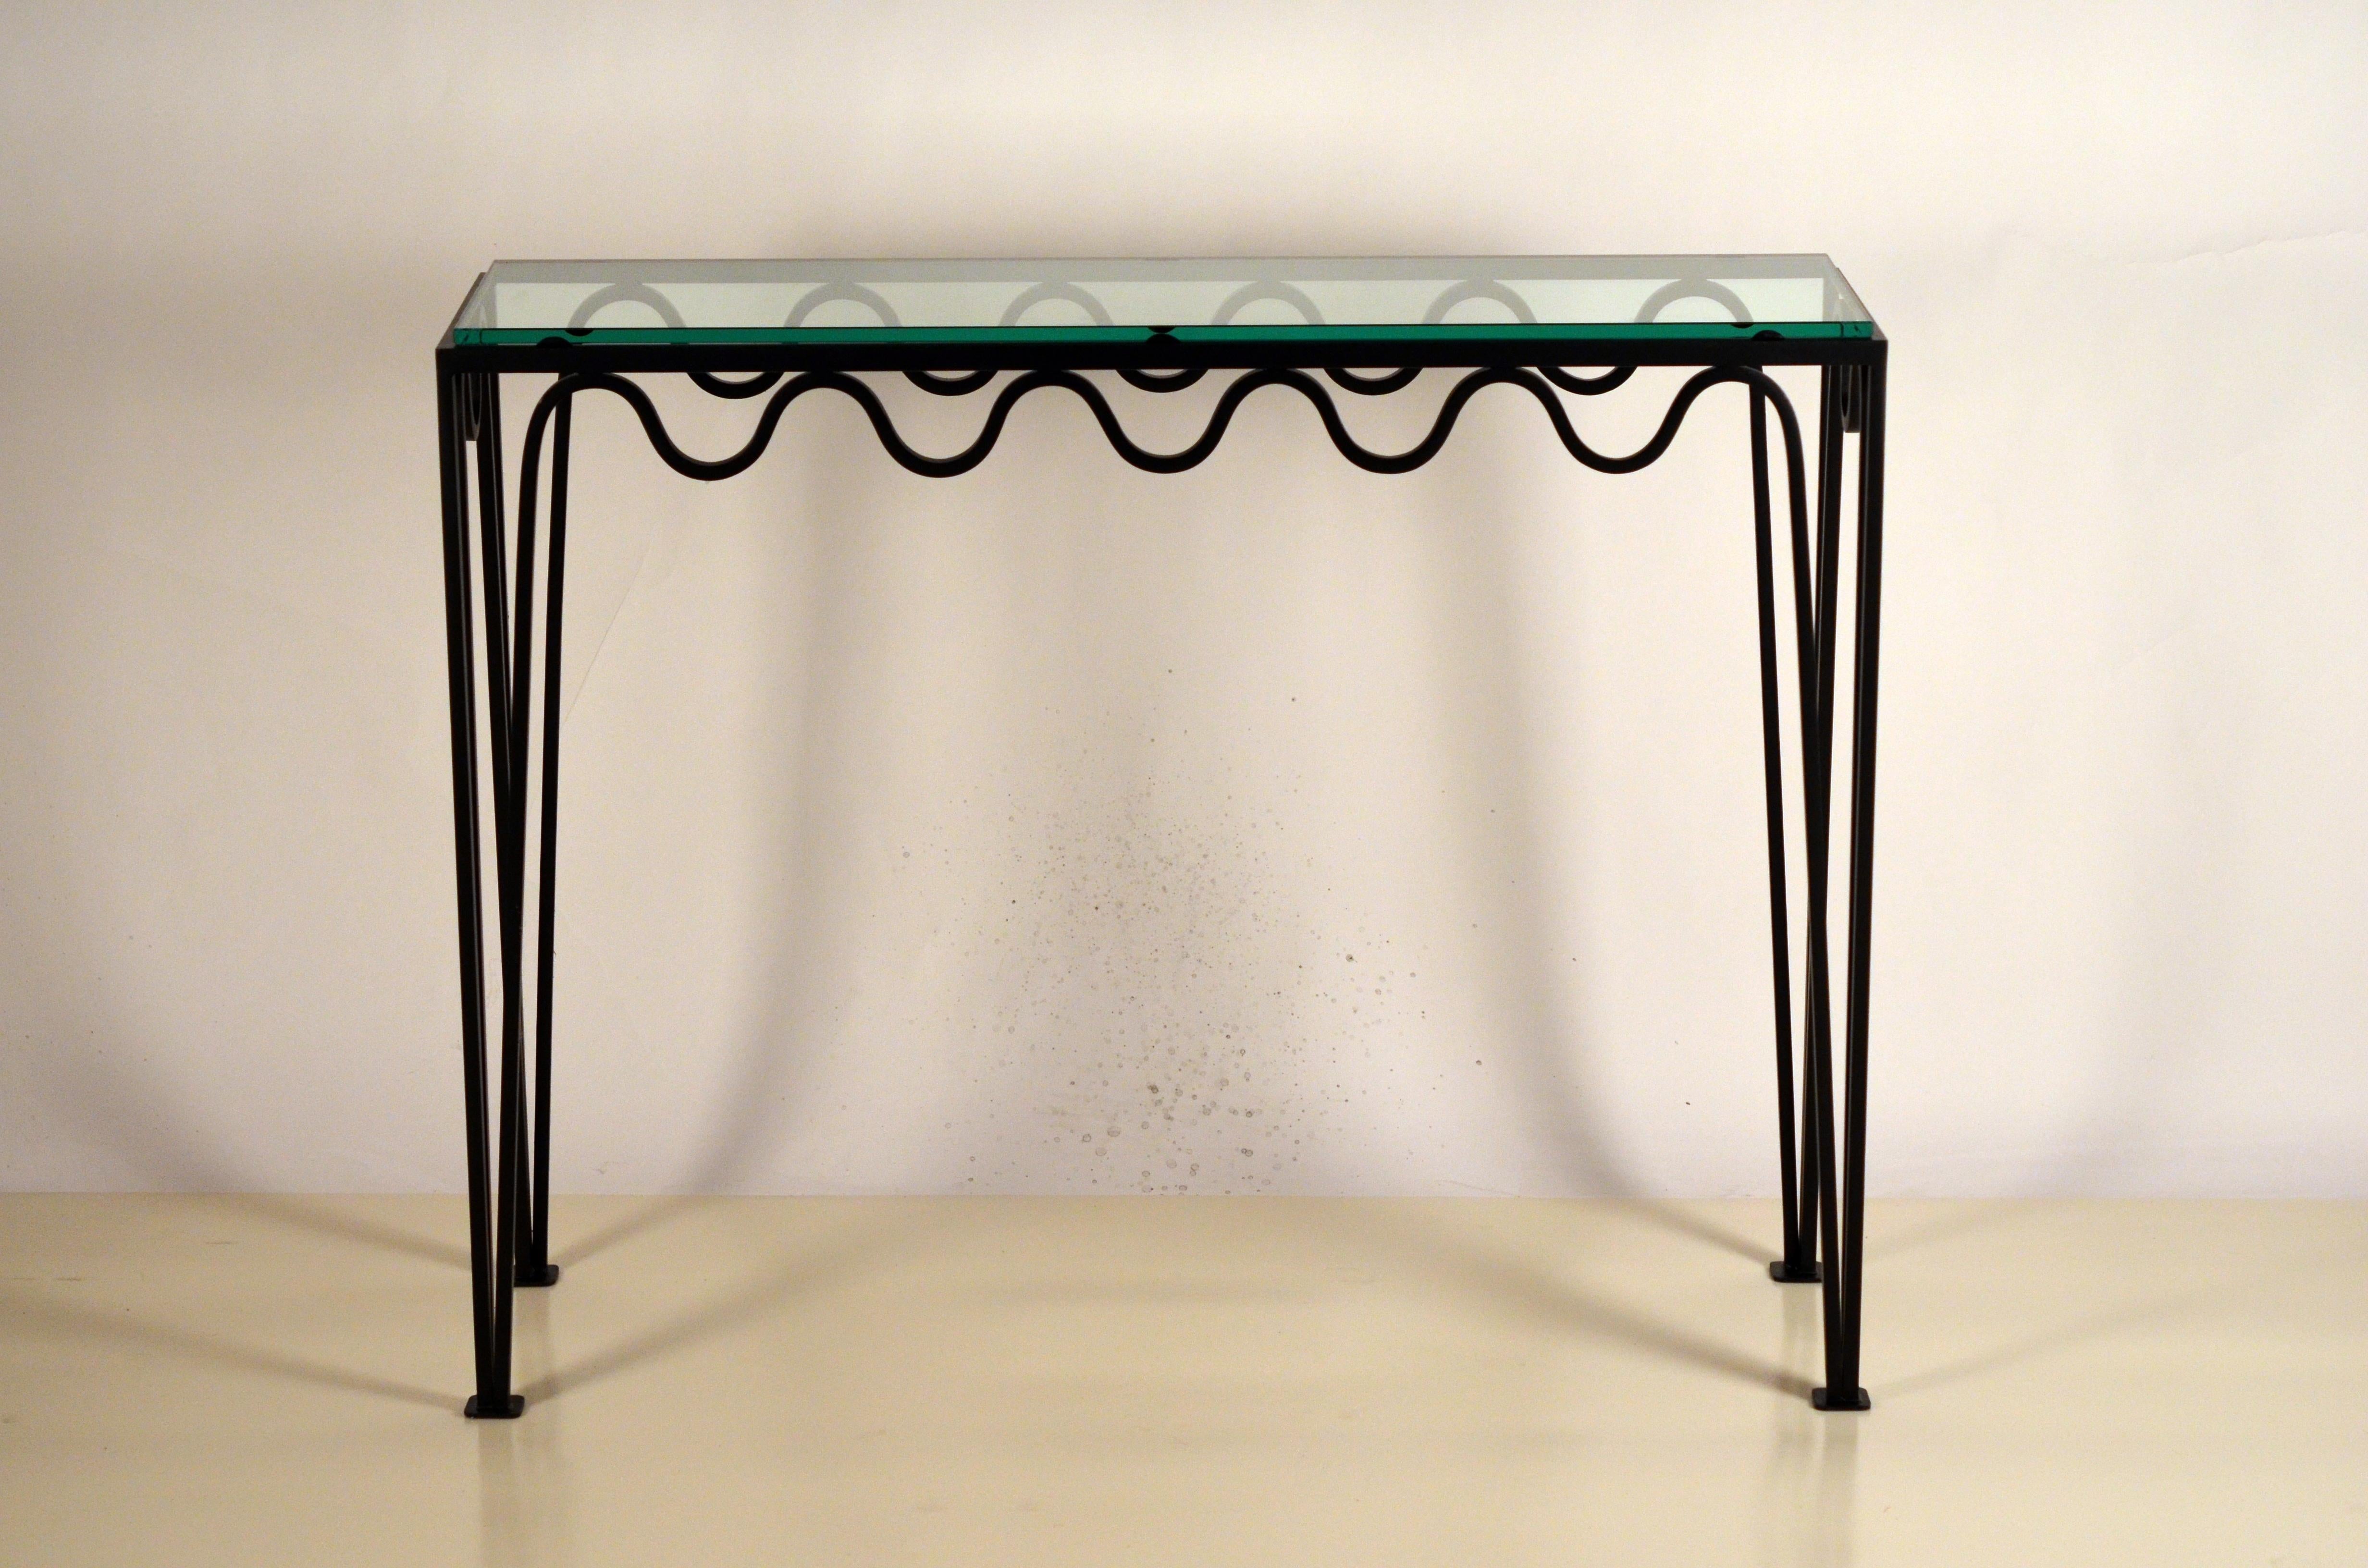 The 'Méandre' undulating blackened wrought iron and glass console by DESIGN FRÈRES.

Chic and understated.